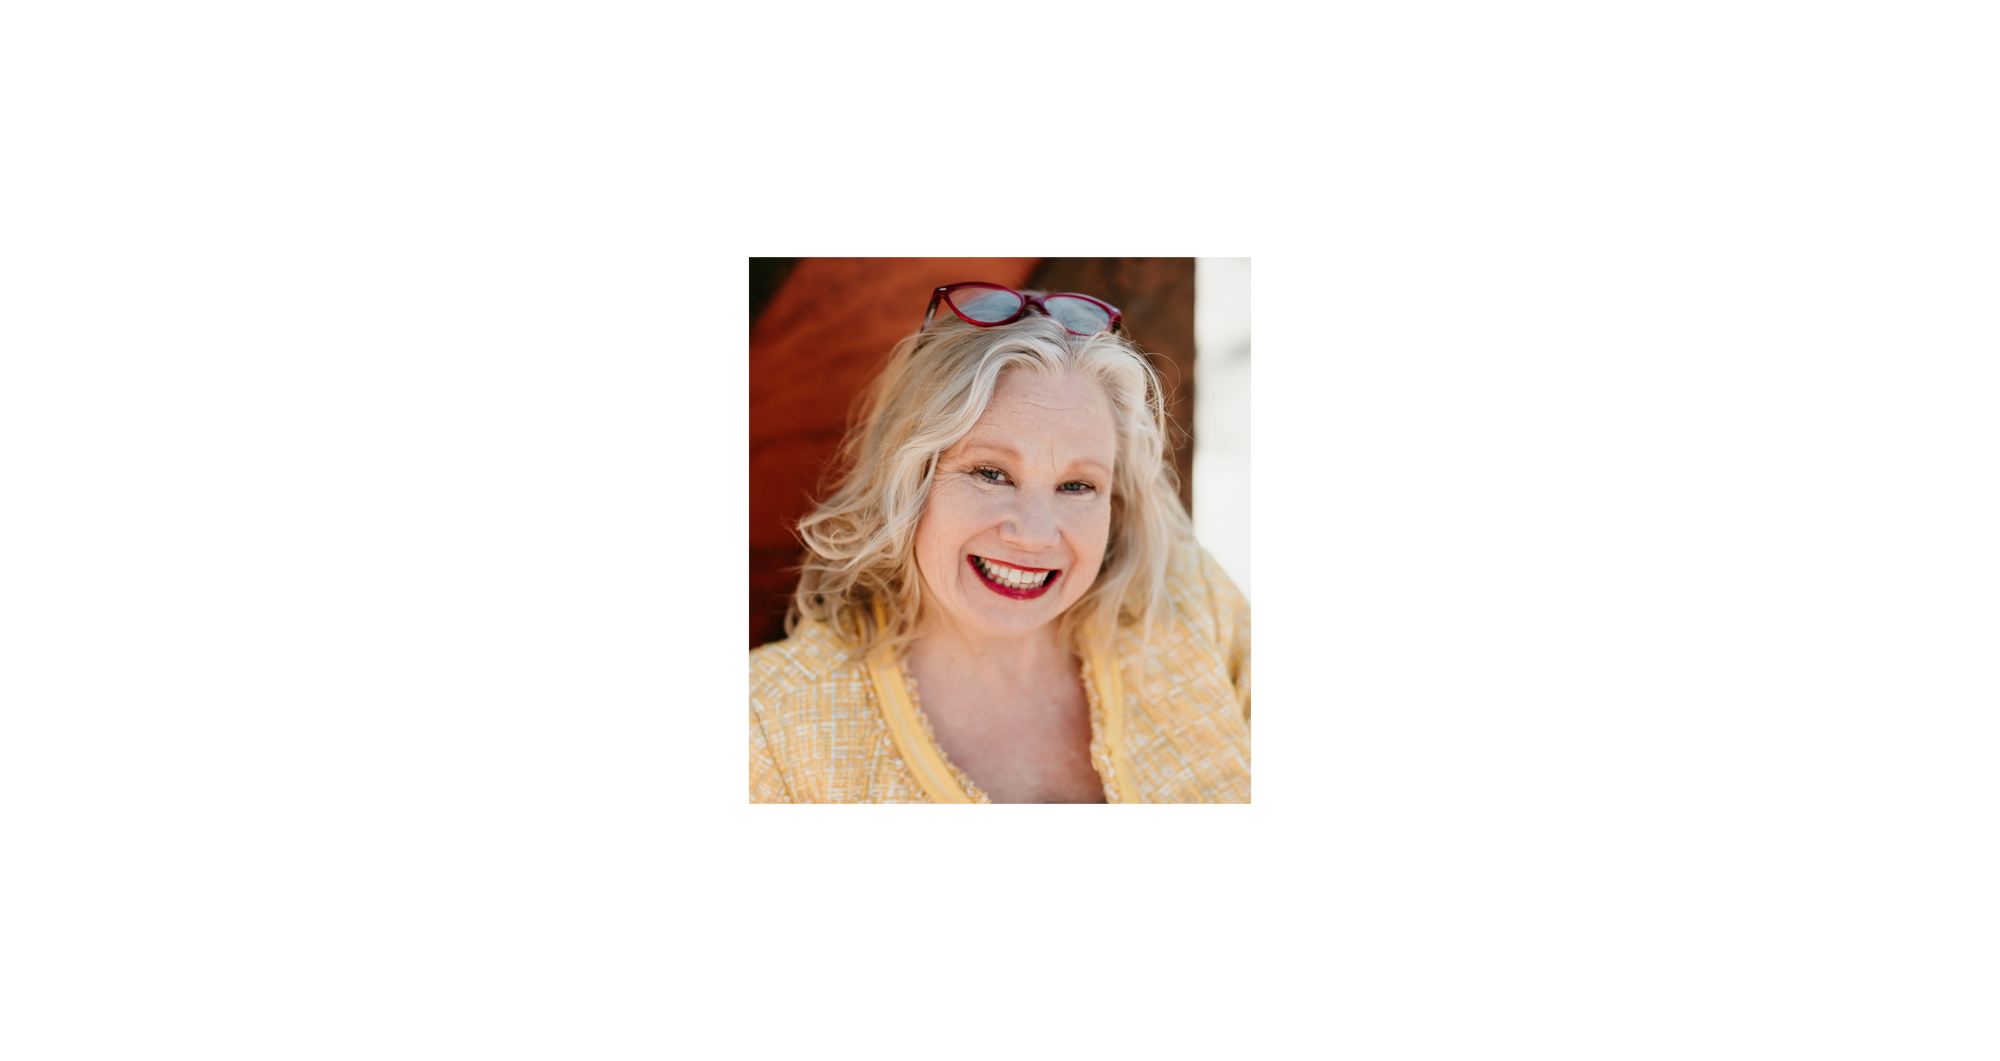 Author, Up-lifter and Seeker of Joy - Deb Rosman